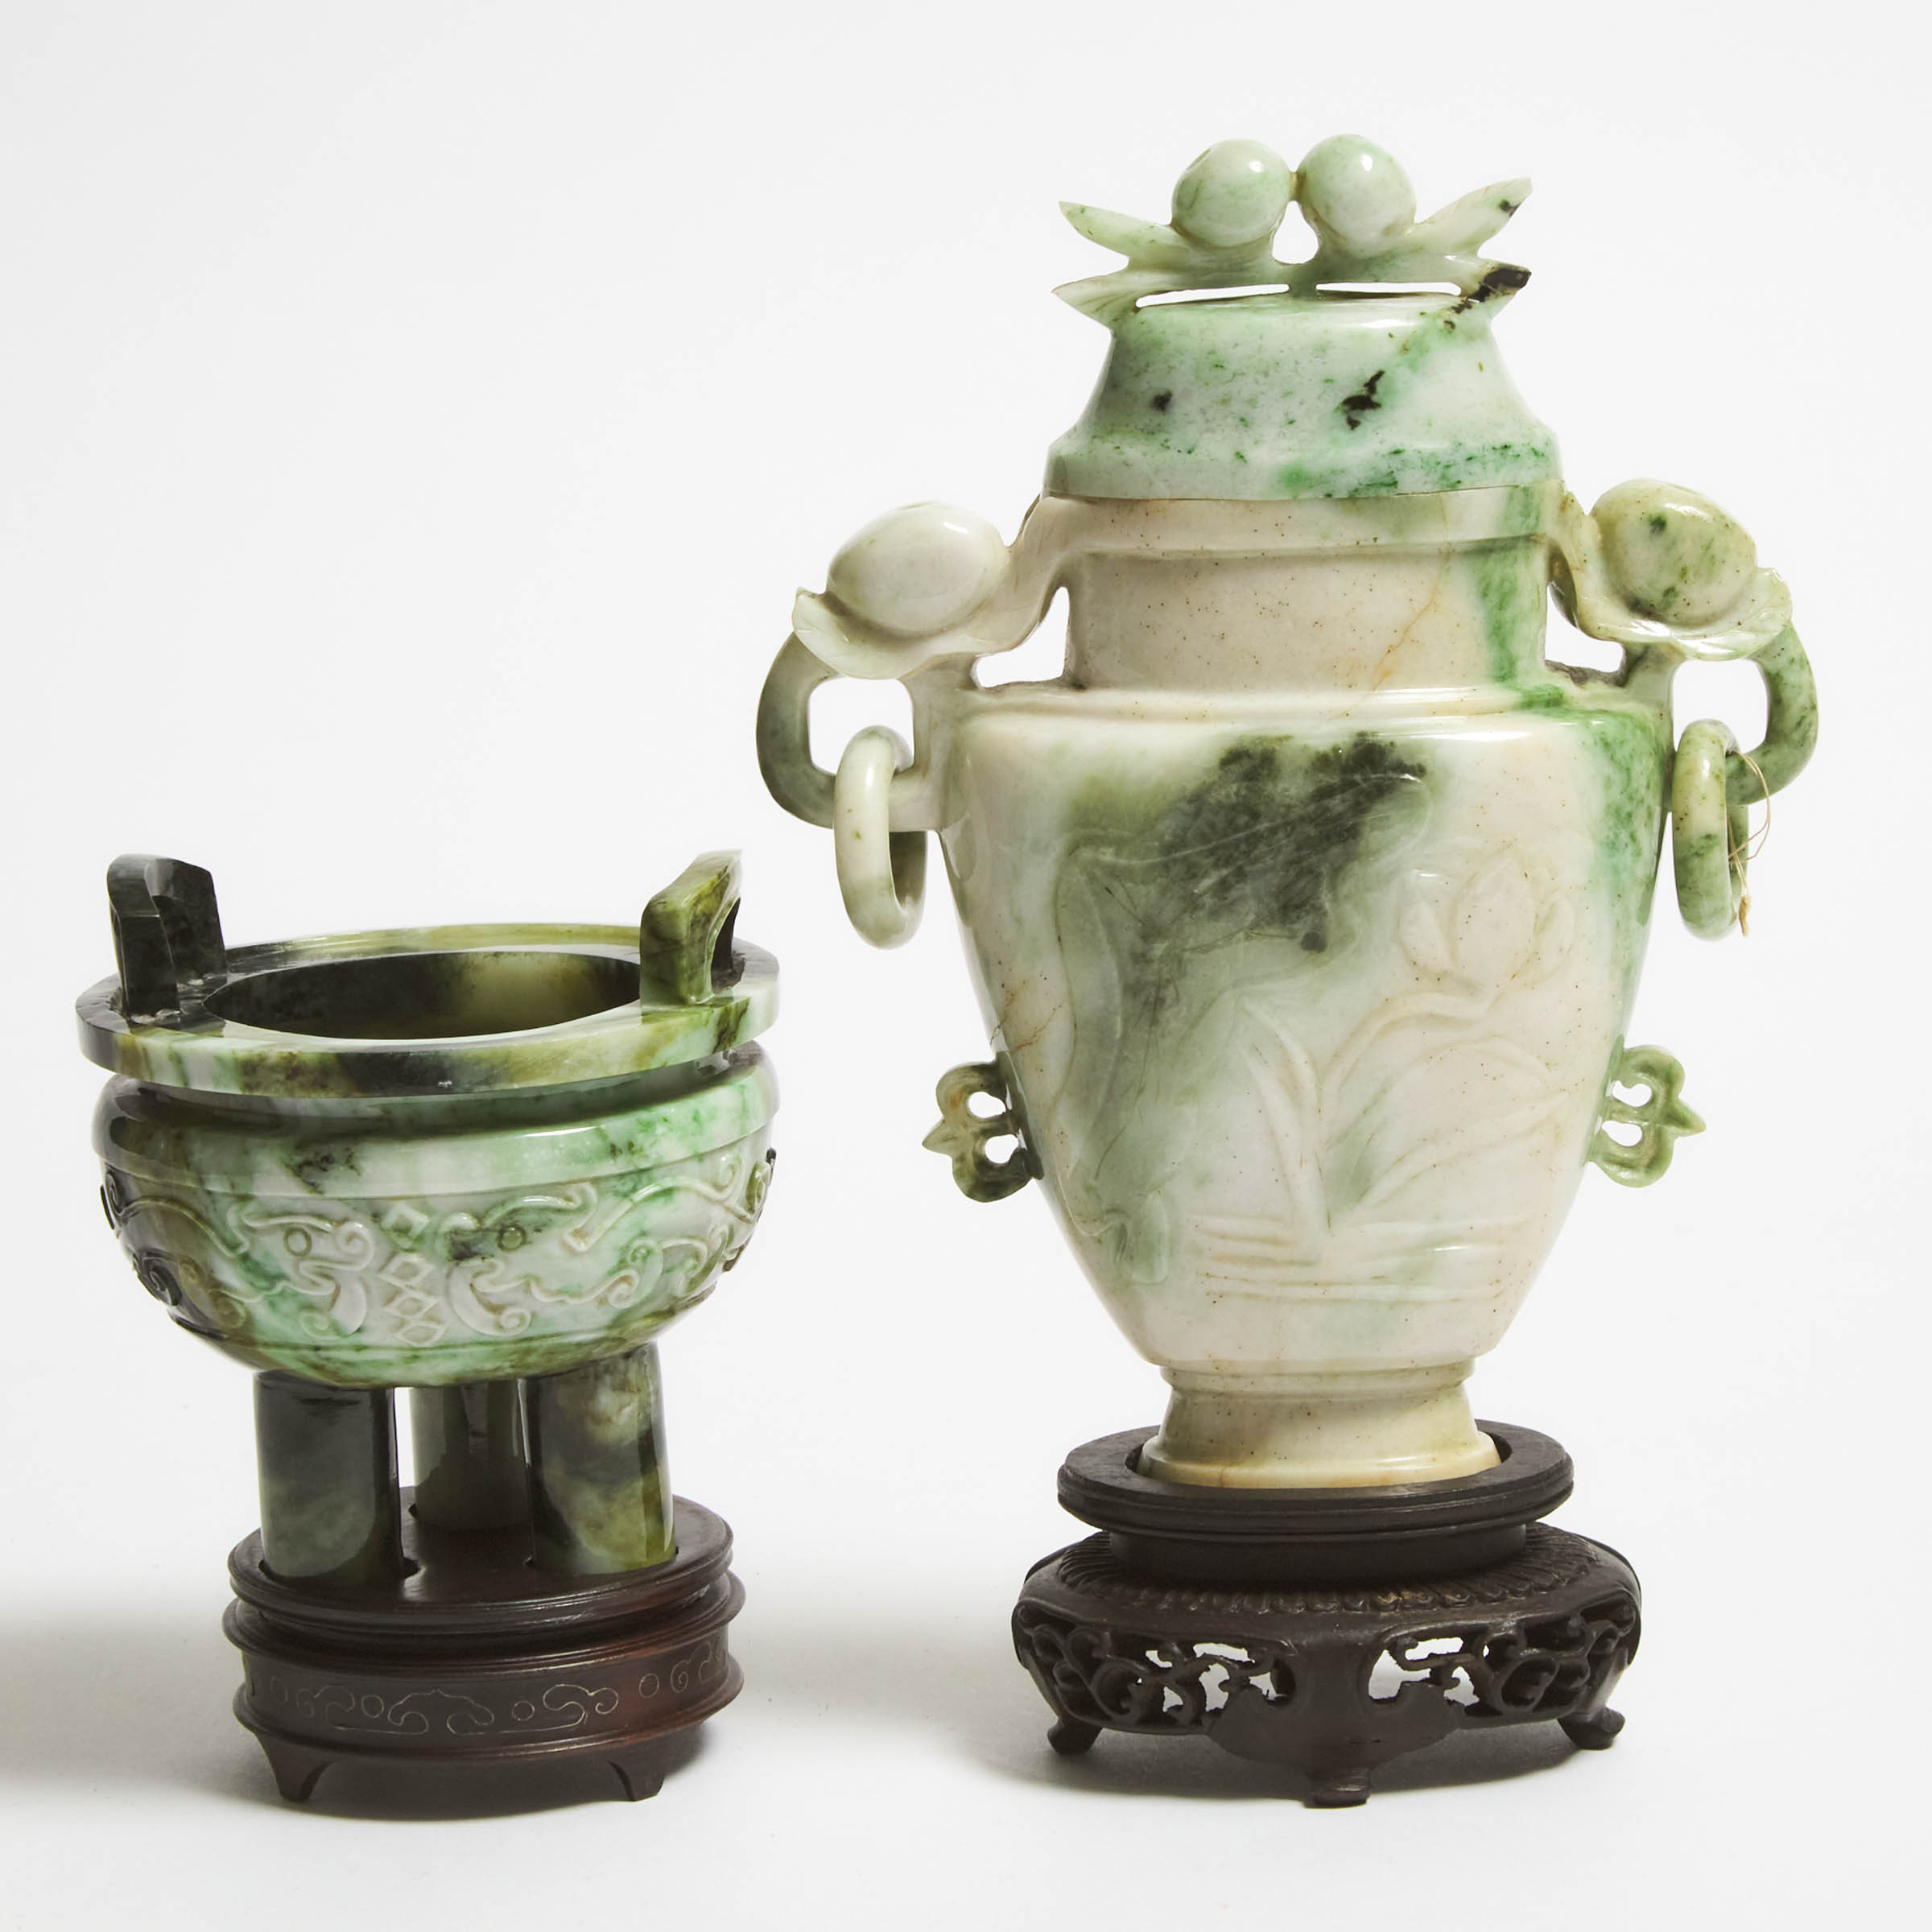 A Jadeite Covered Vase and Incense Burner, Republican Period or Later